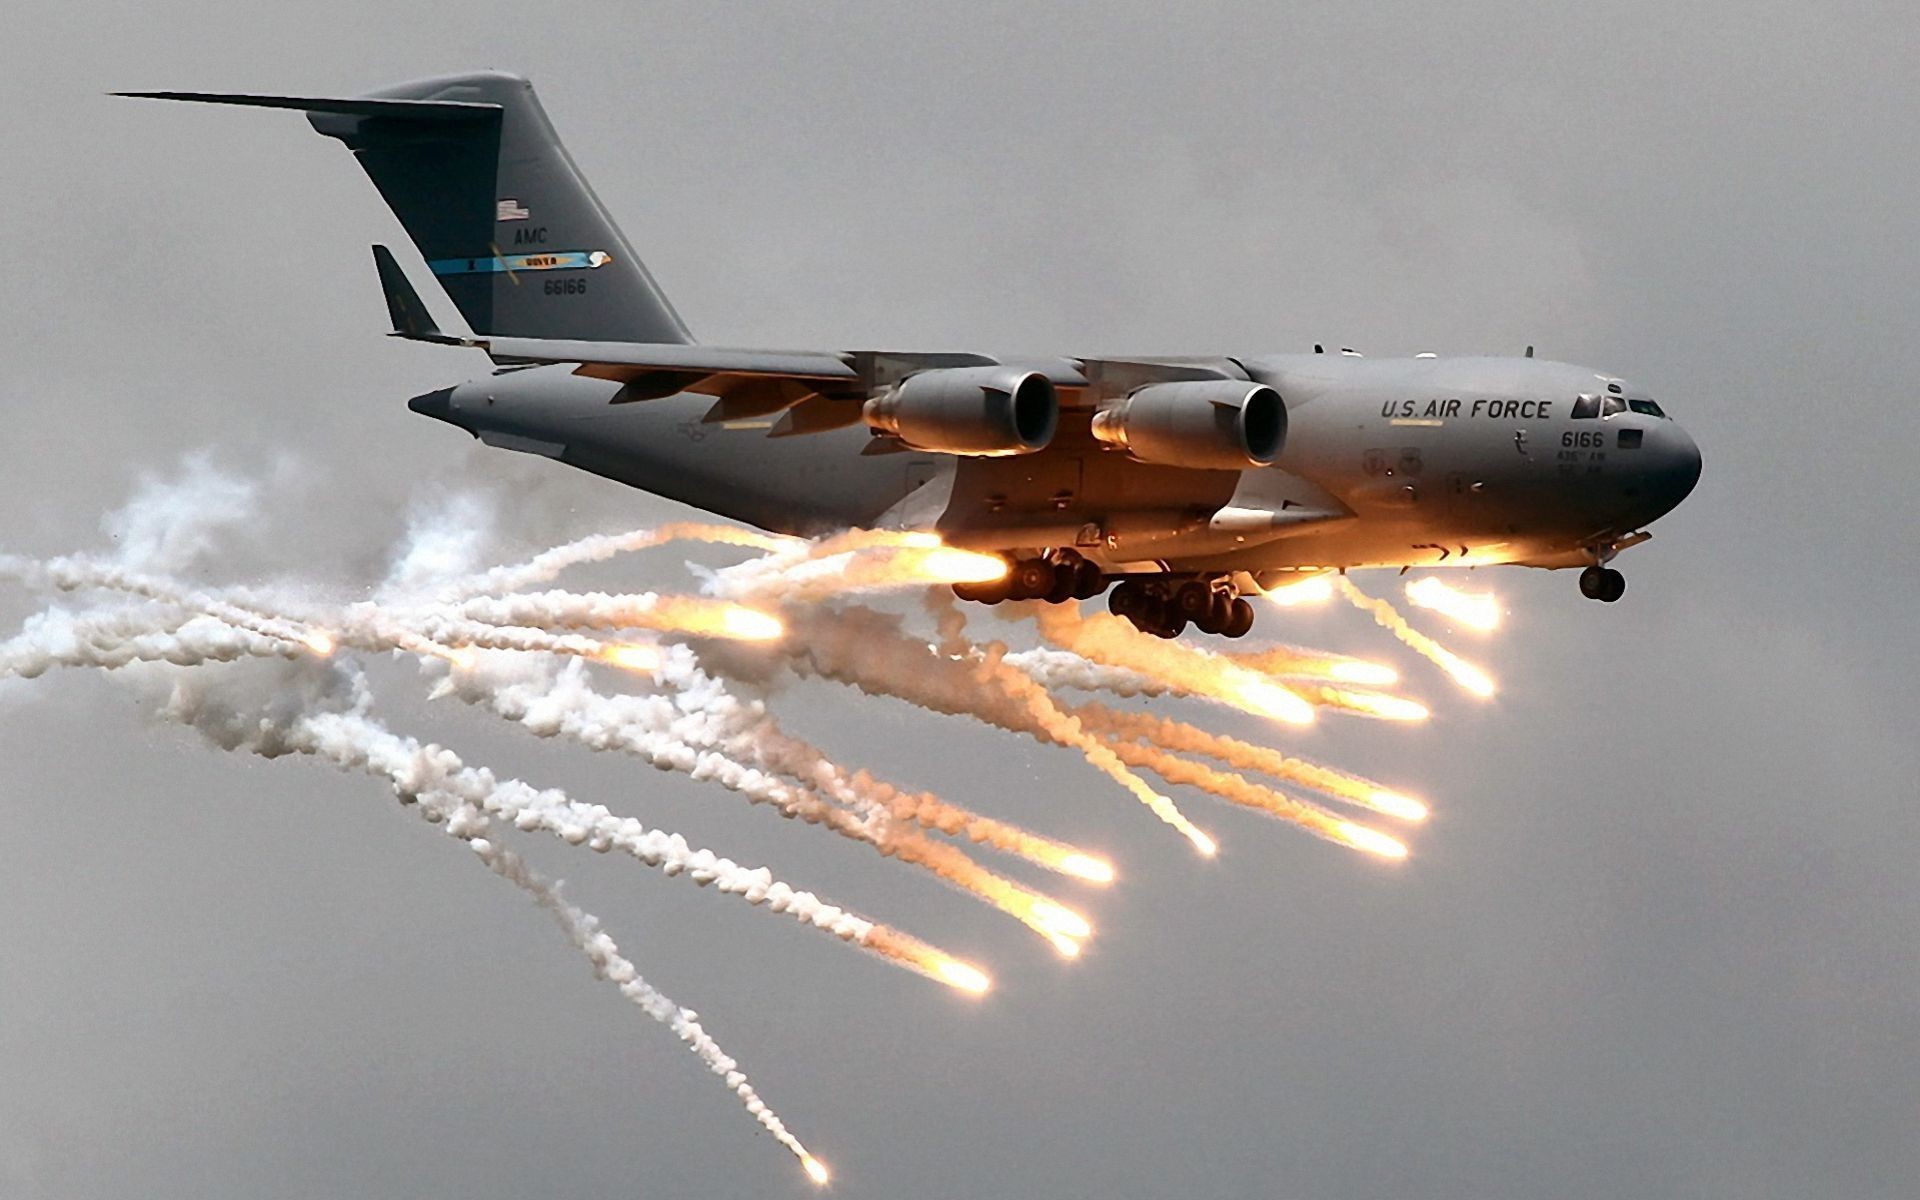 General 1920x1200 military aircraft flares US Air Force vehicle aircraft military numbers Boeing Boeing C-17 Globemaster III American aircraft